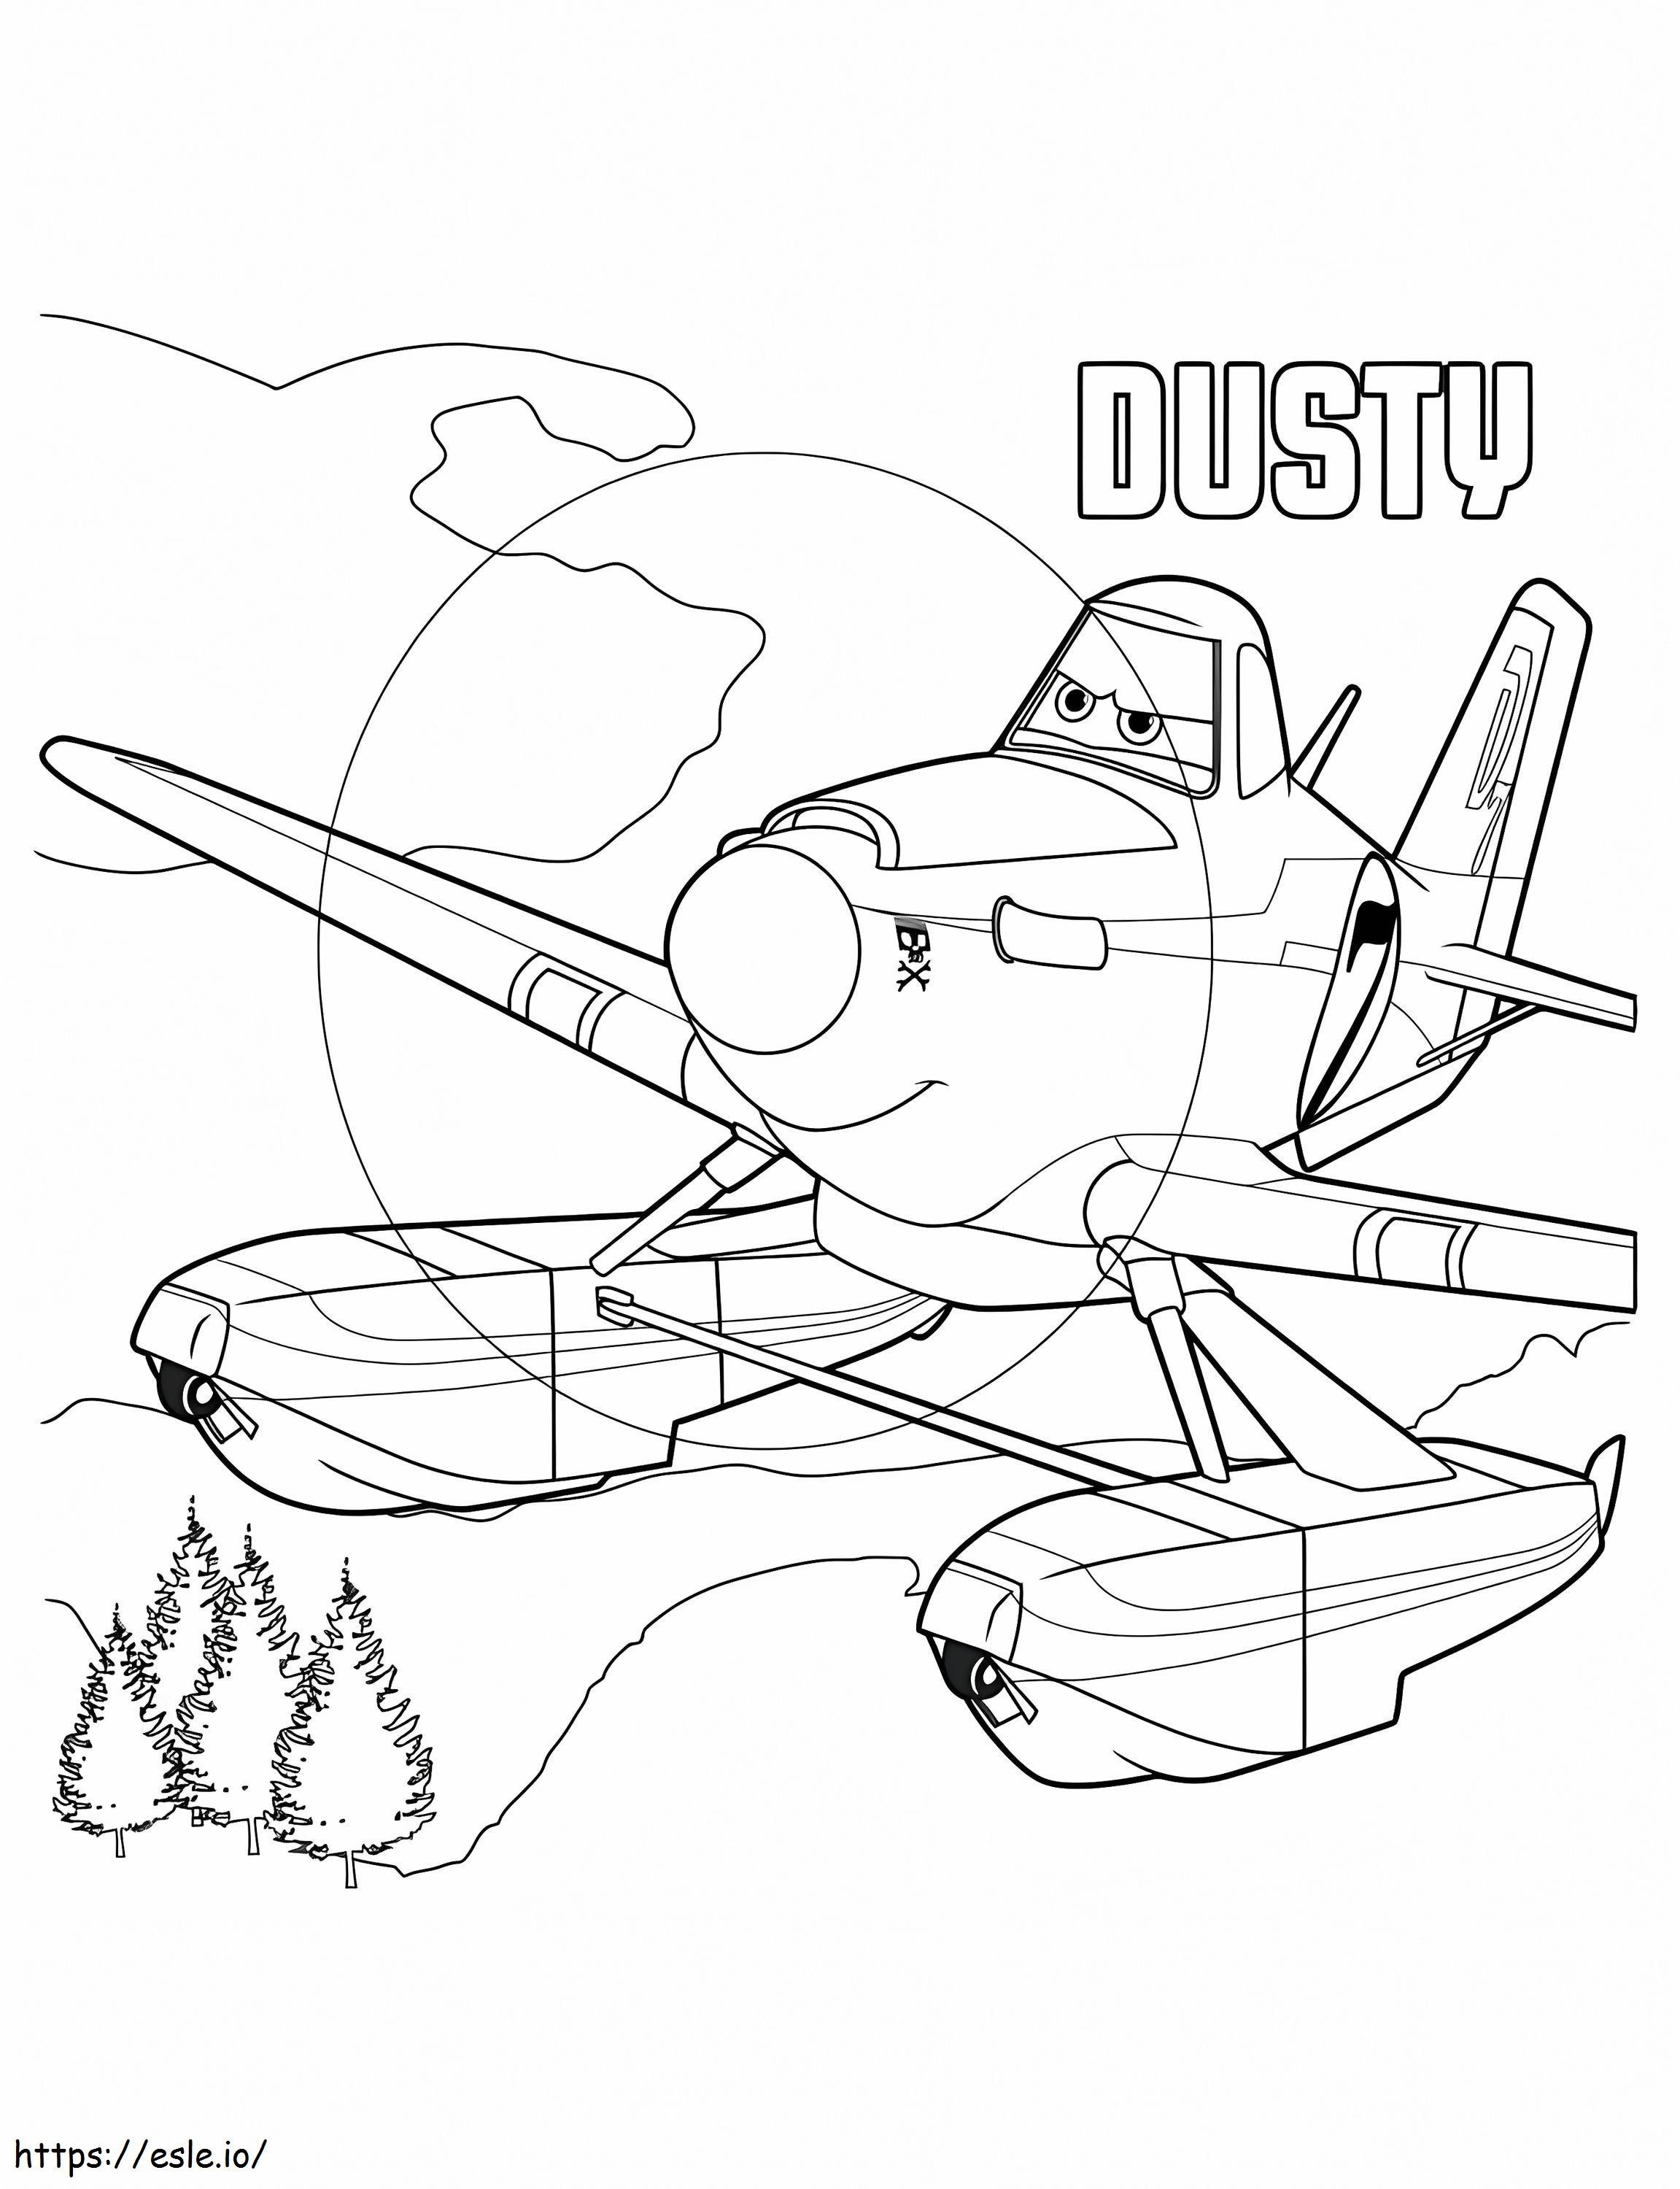 Cool Dusty Planes coloring page